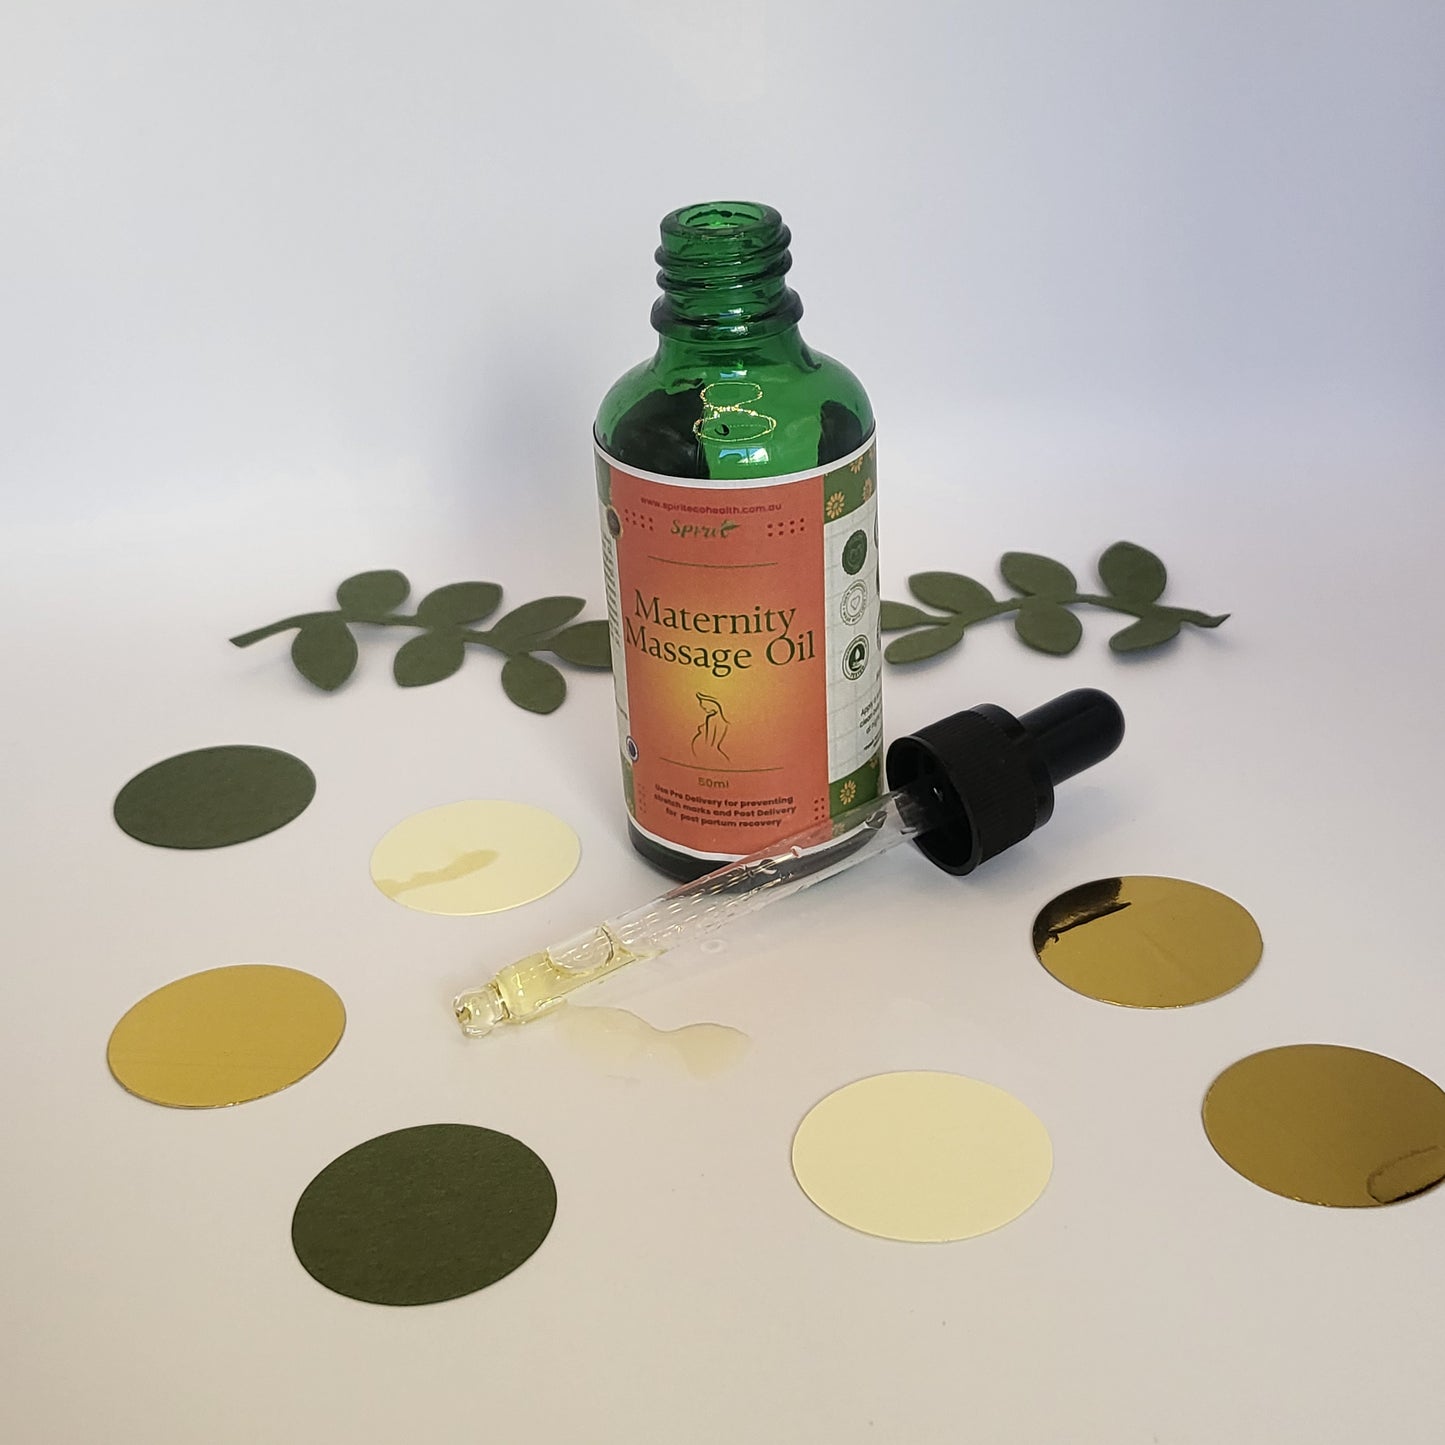 Spirit Belly anti stretch mark oil next to green and golden confetti